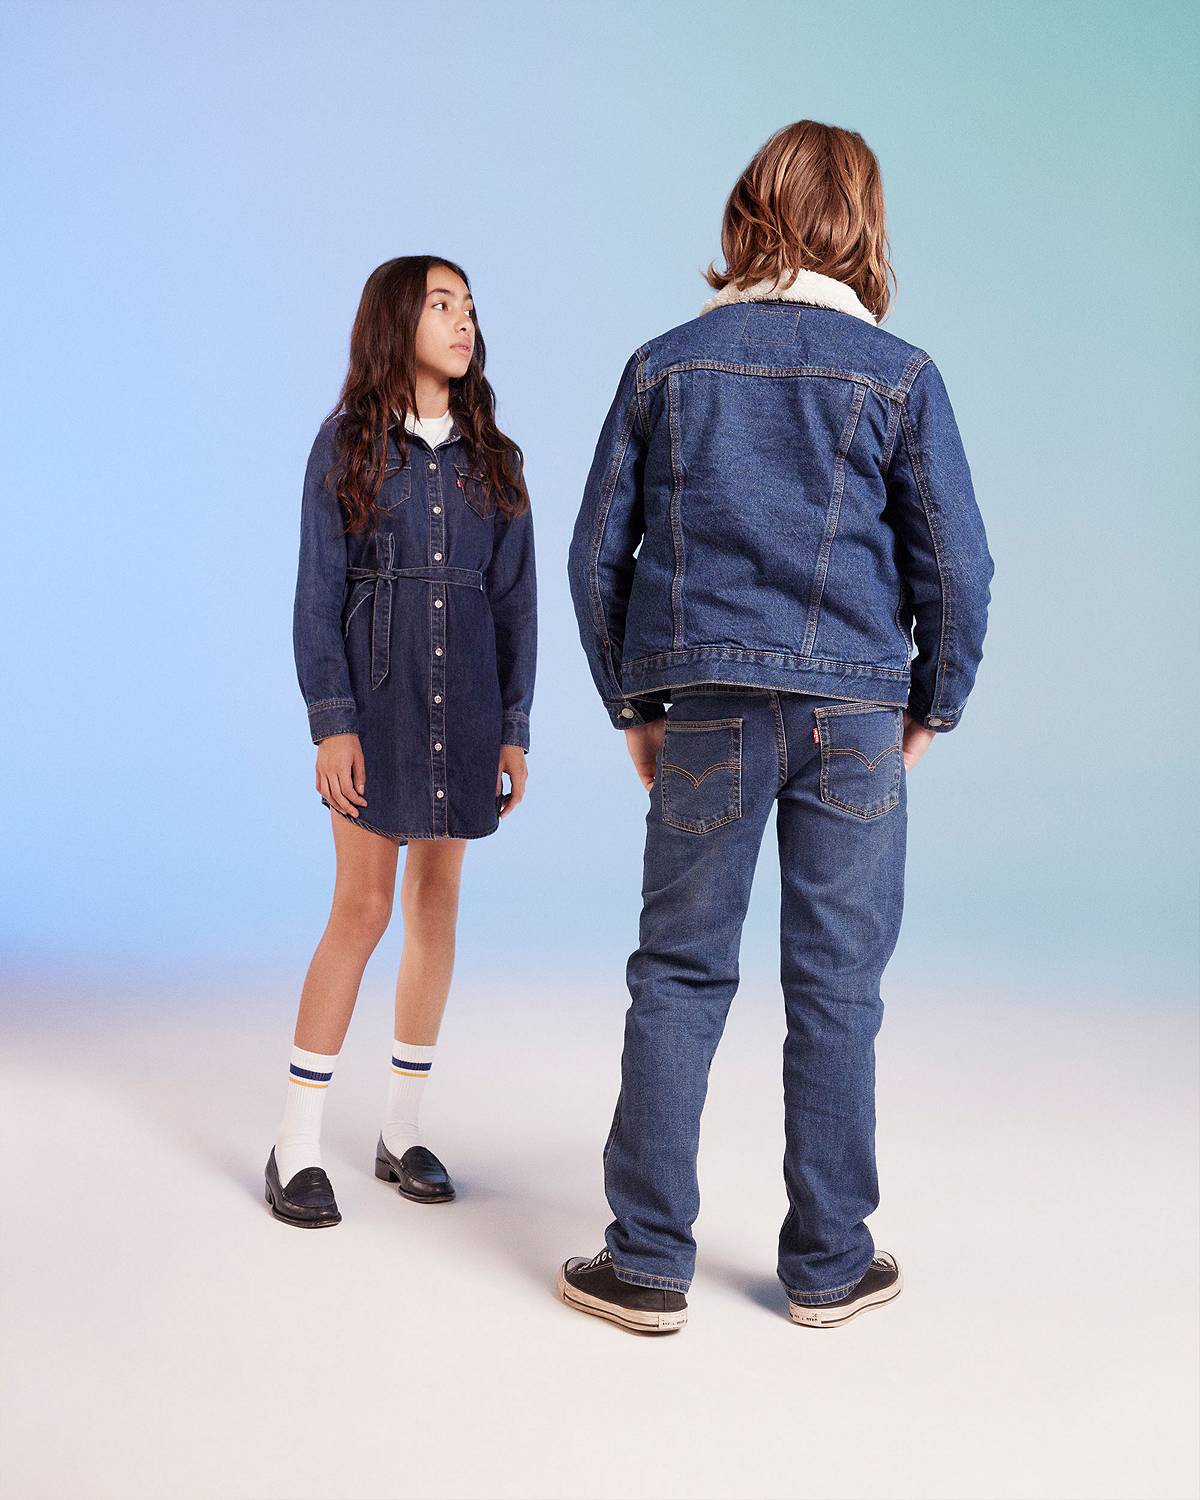 Models against a multi blue background in denim dress and all denim outfit